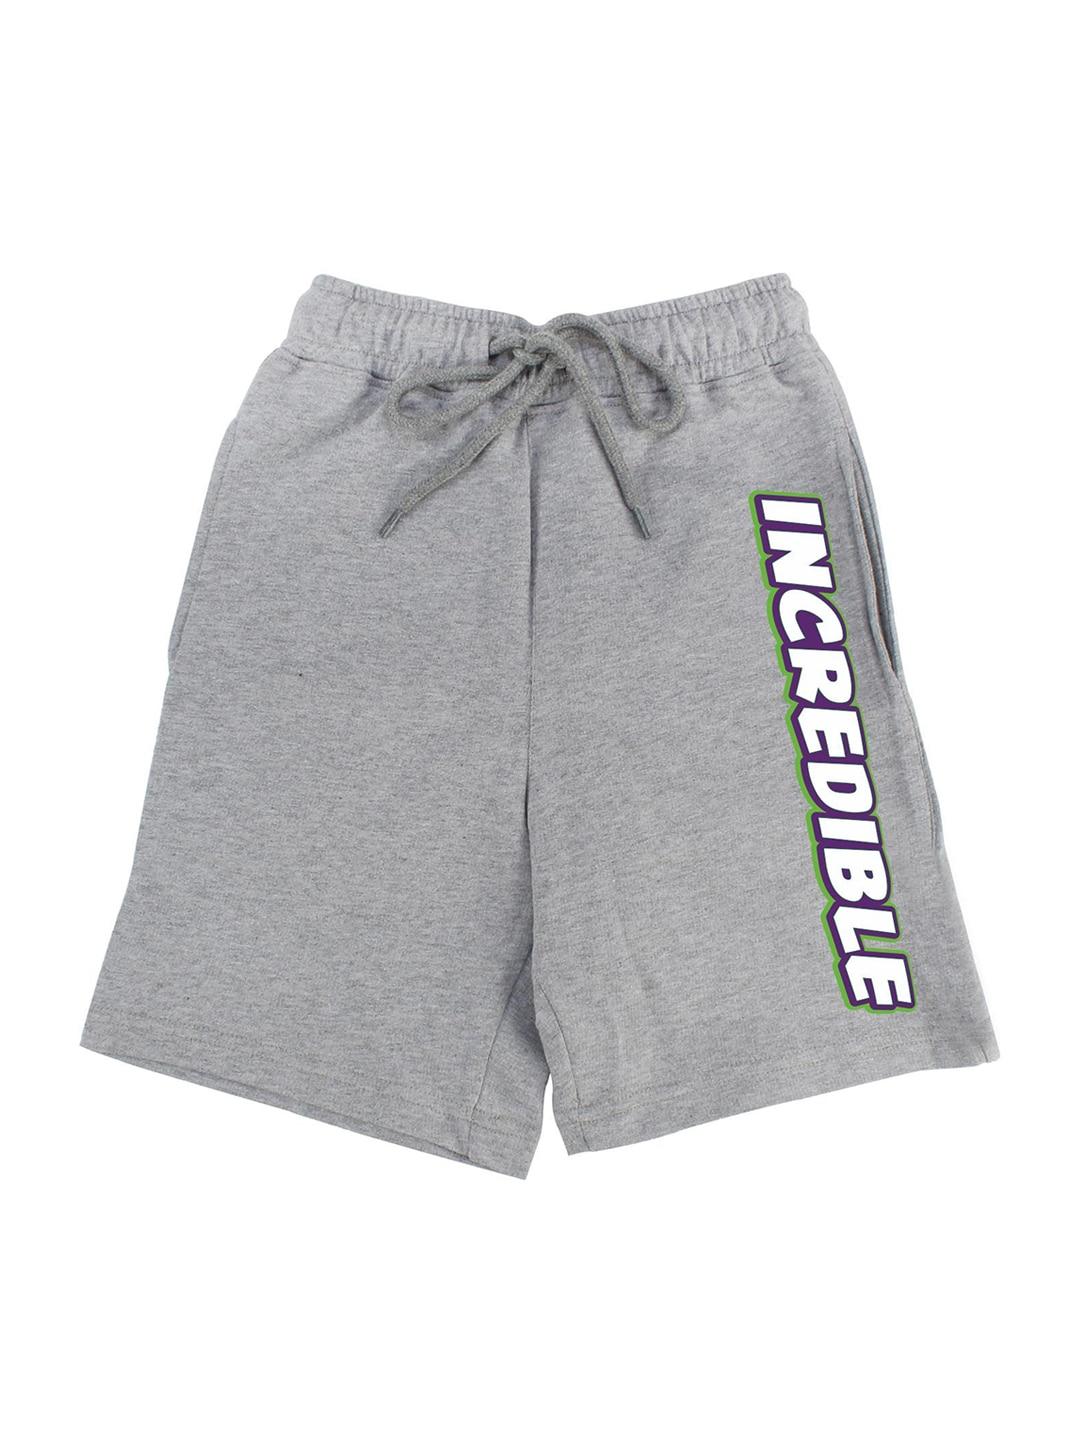 marvel-by-wear-your-mind-boys-grey-avengers-shorts